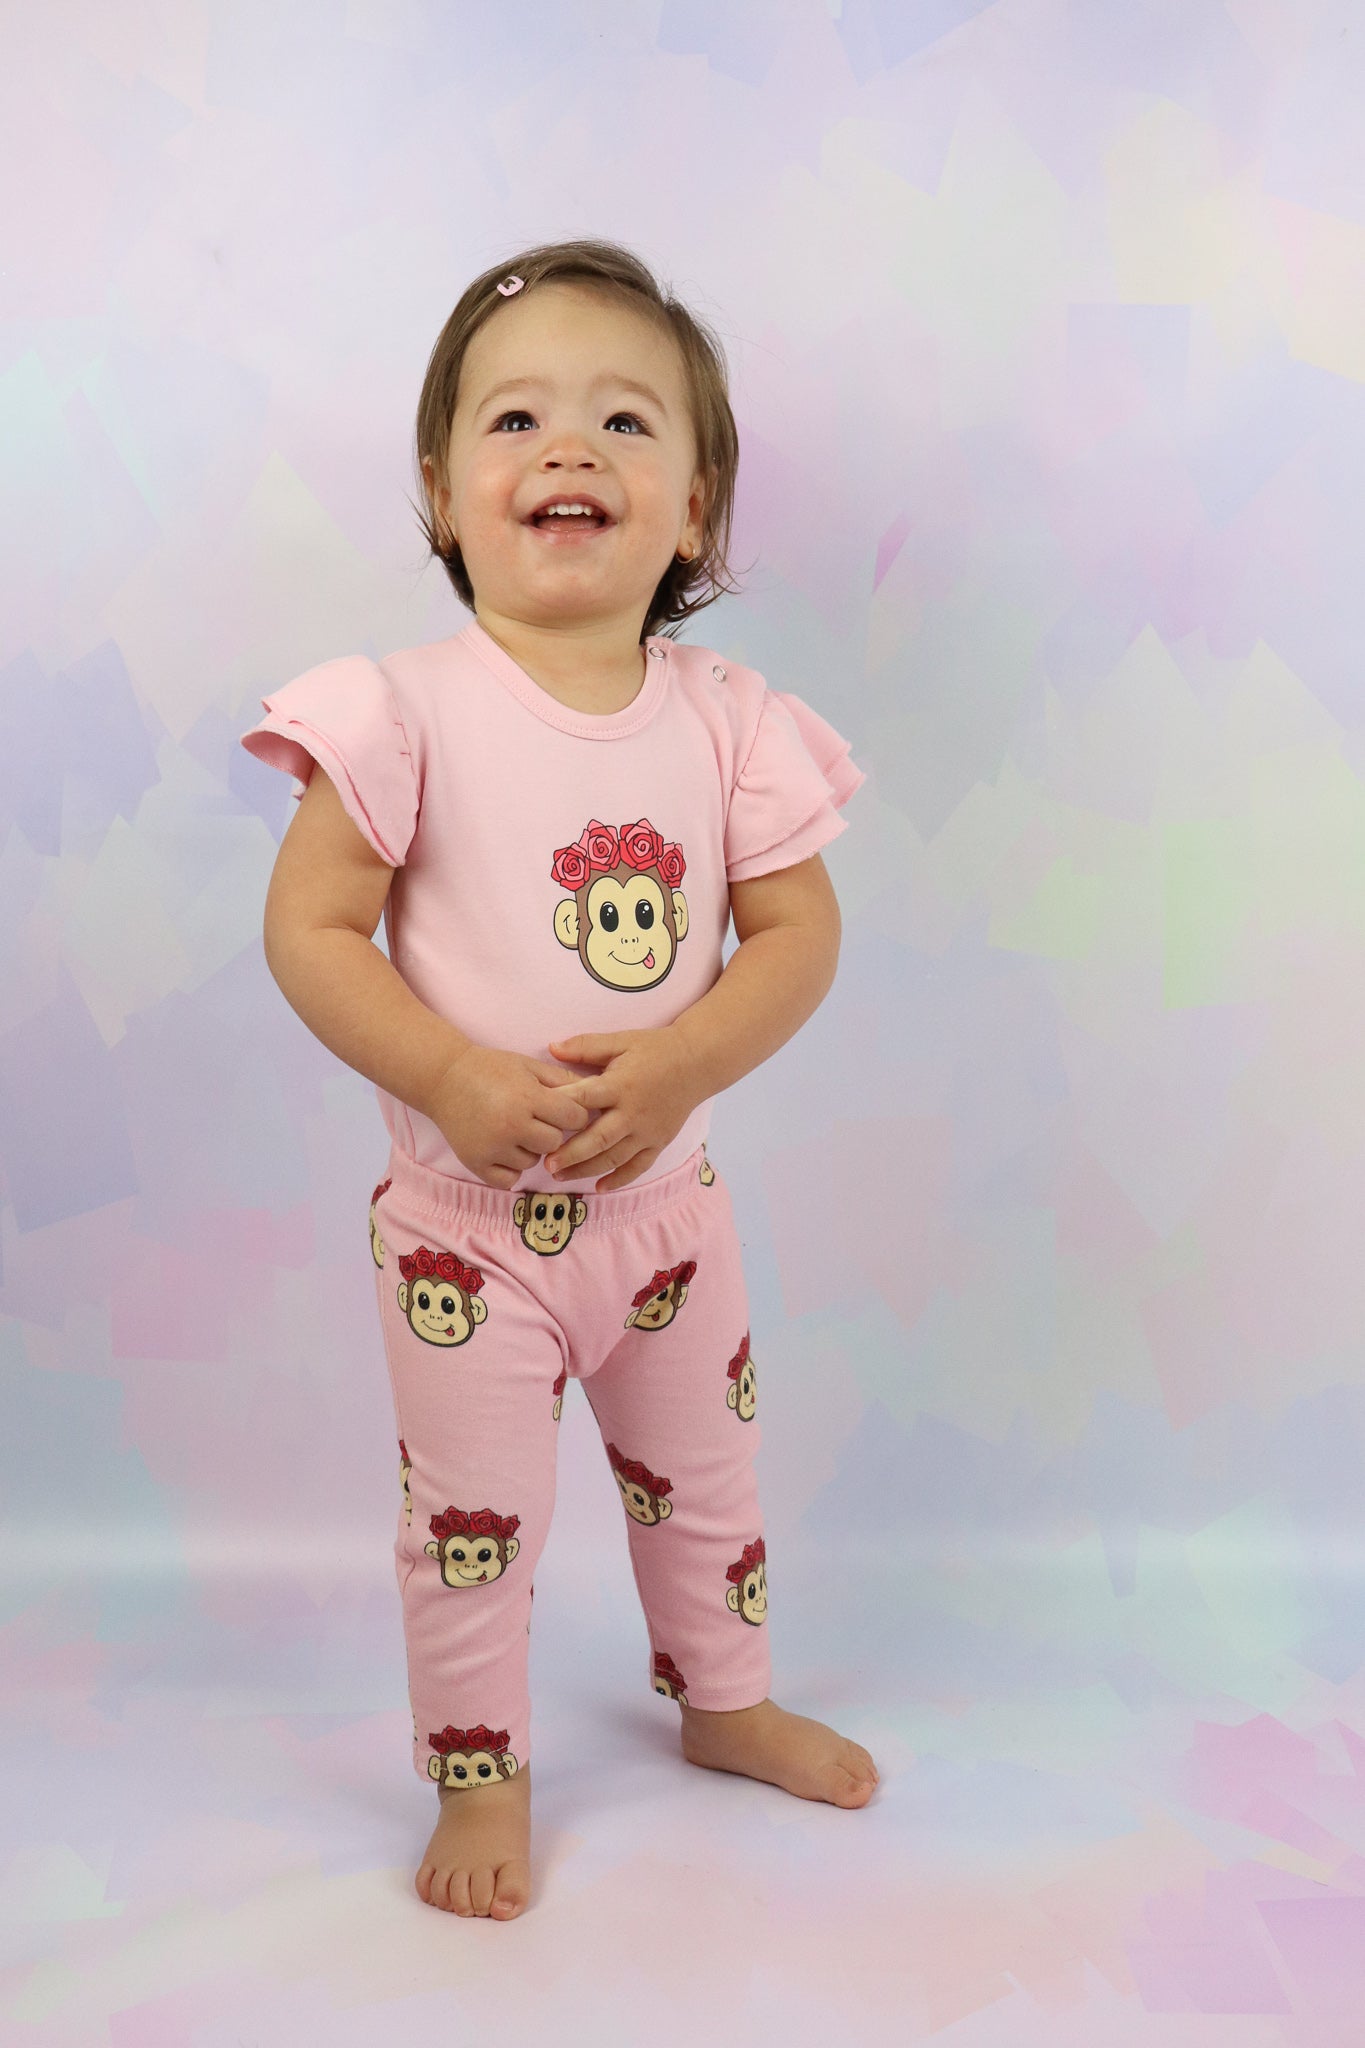 toddler girl wearing a frilly pink romper with a cute monkey face printed on it. Also wearing pink leggings with cute monkey faces printed all over